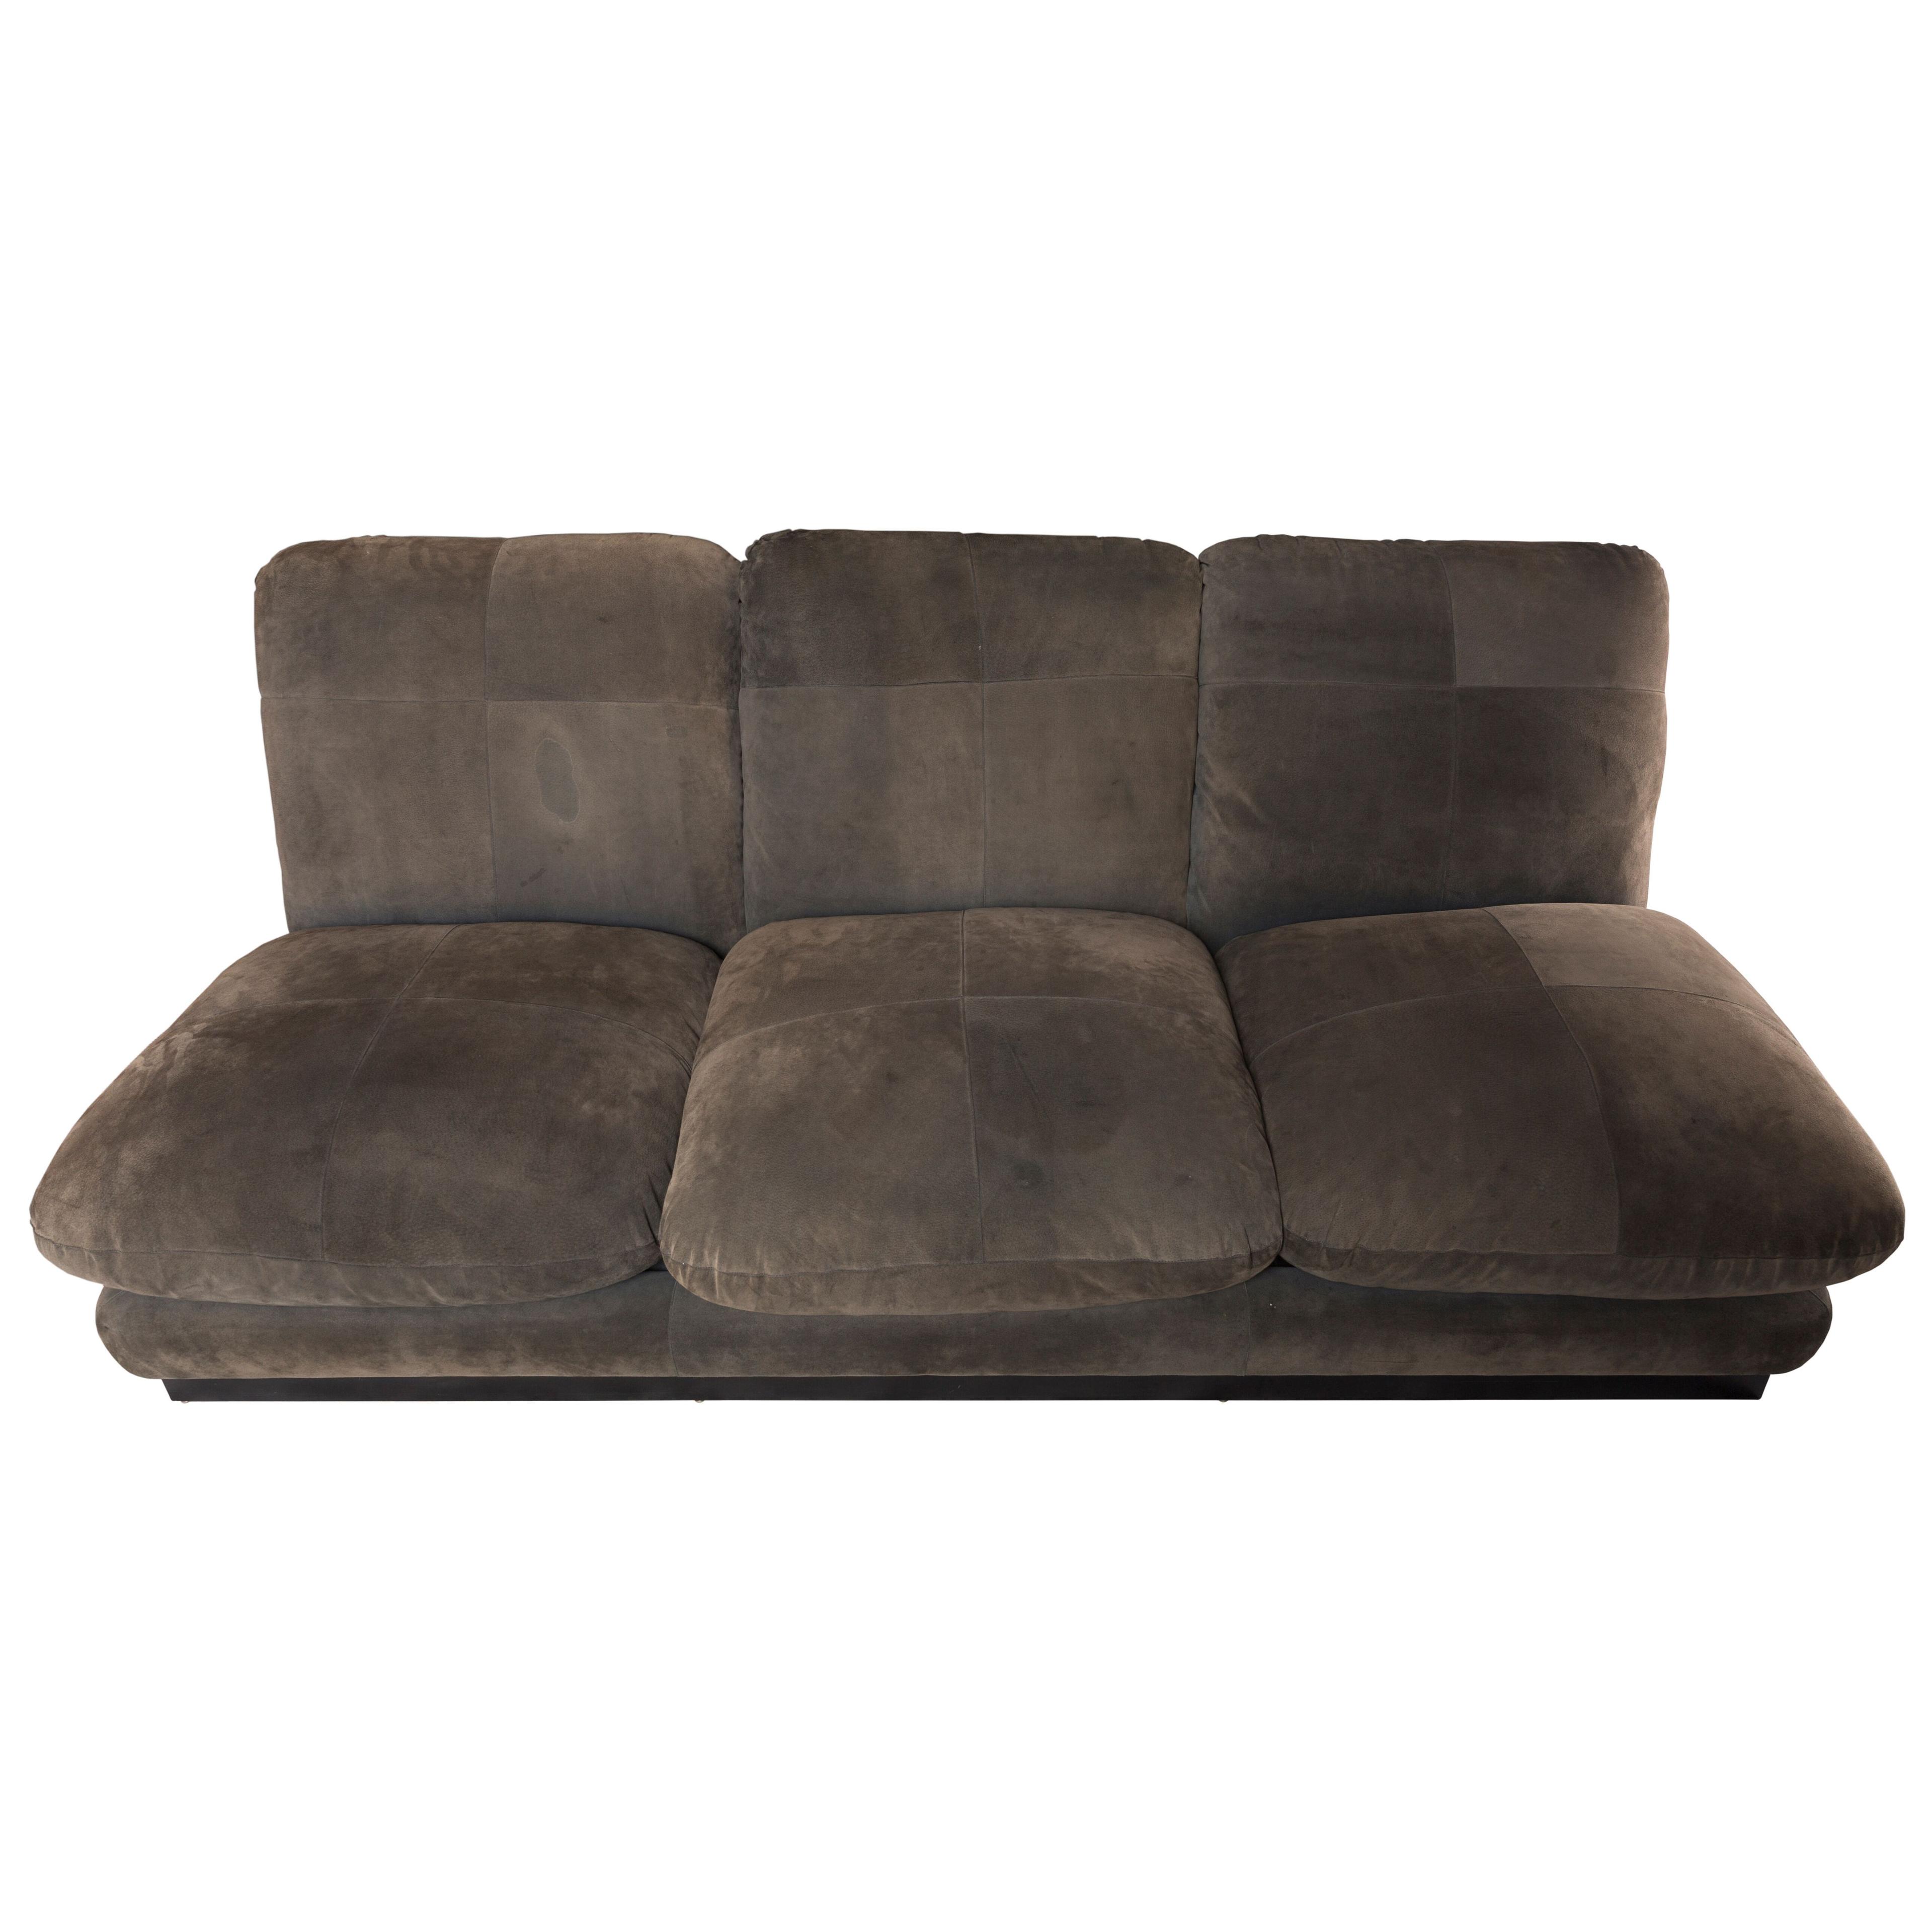 1970s postmodern brown leather 3 seater sofa by Willy Rizzo